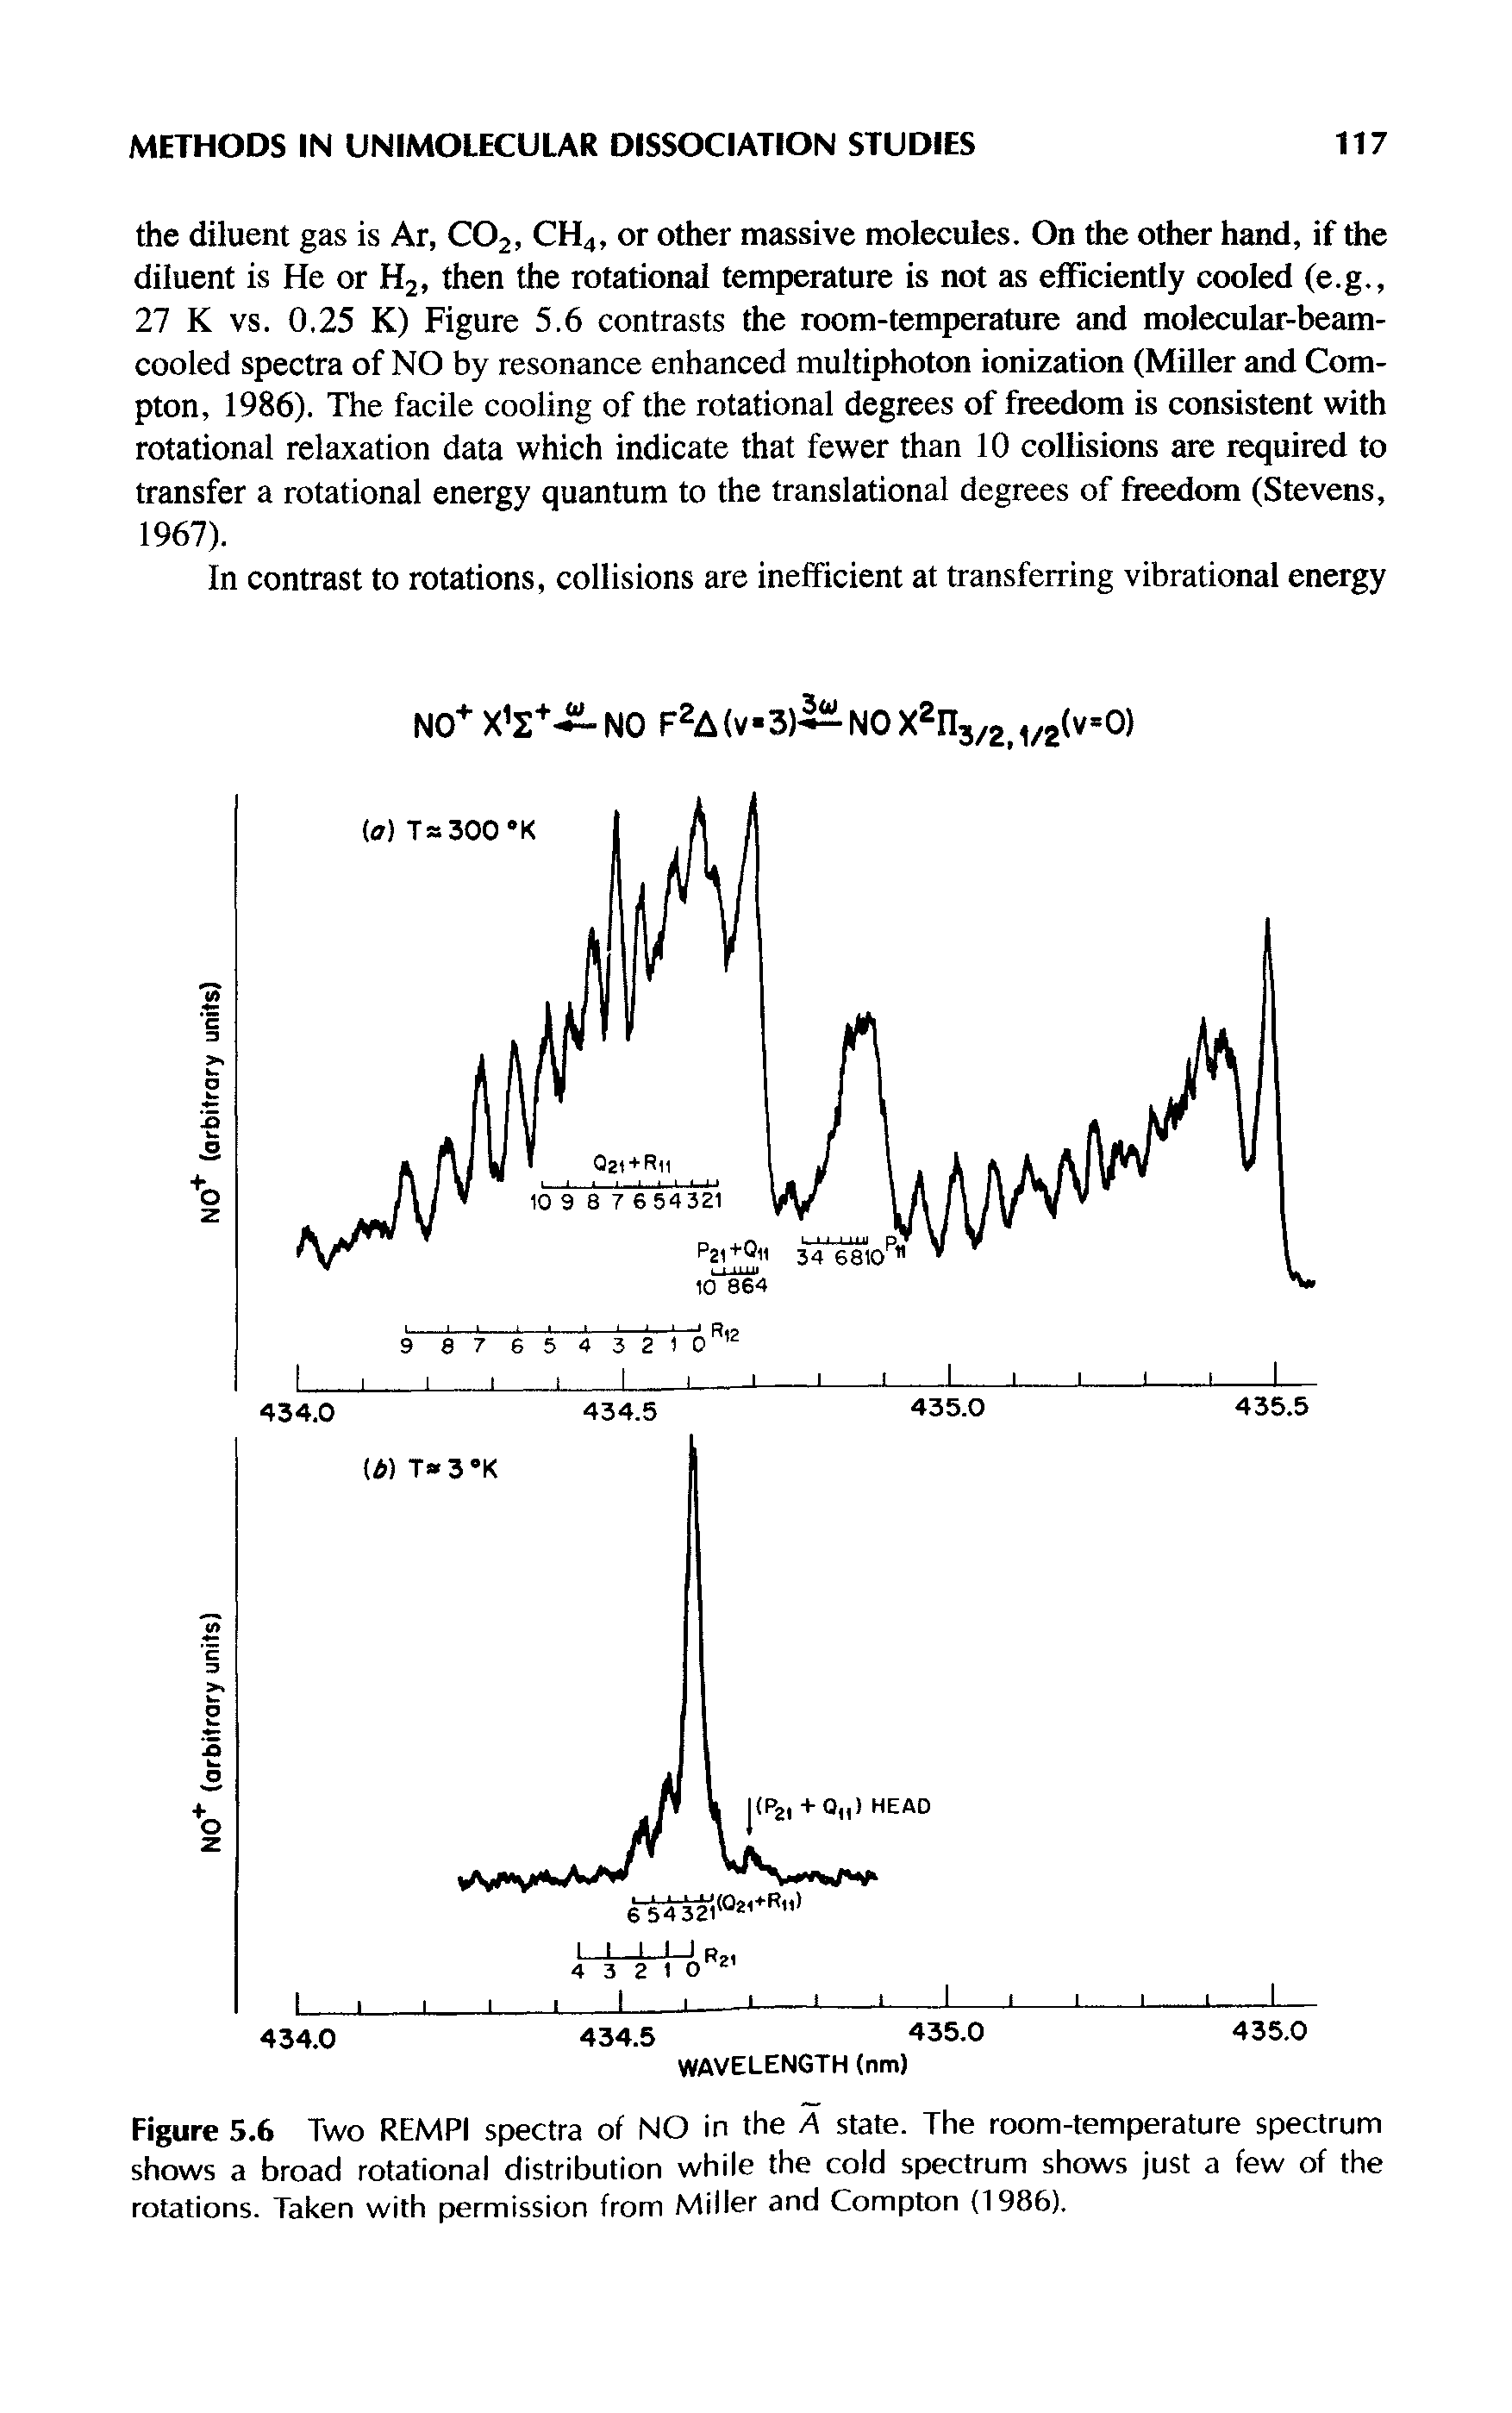 Figure 5.6 Two REMPI spectra of NO in the A state. The room-temperature spectrum shows a broad rotational distribution while the cold spectrum shows just a few of the rotations. Taken with permission from Miller and Compton (1986).